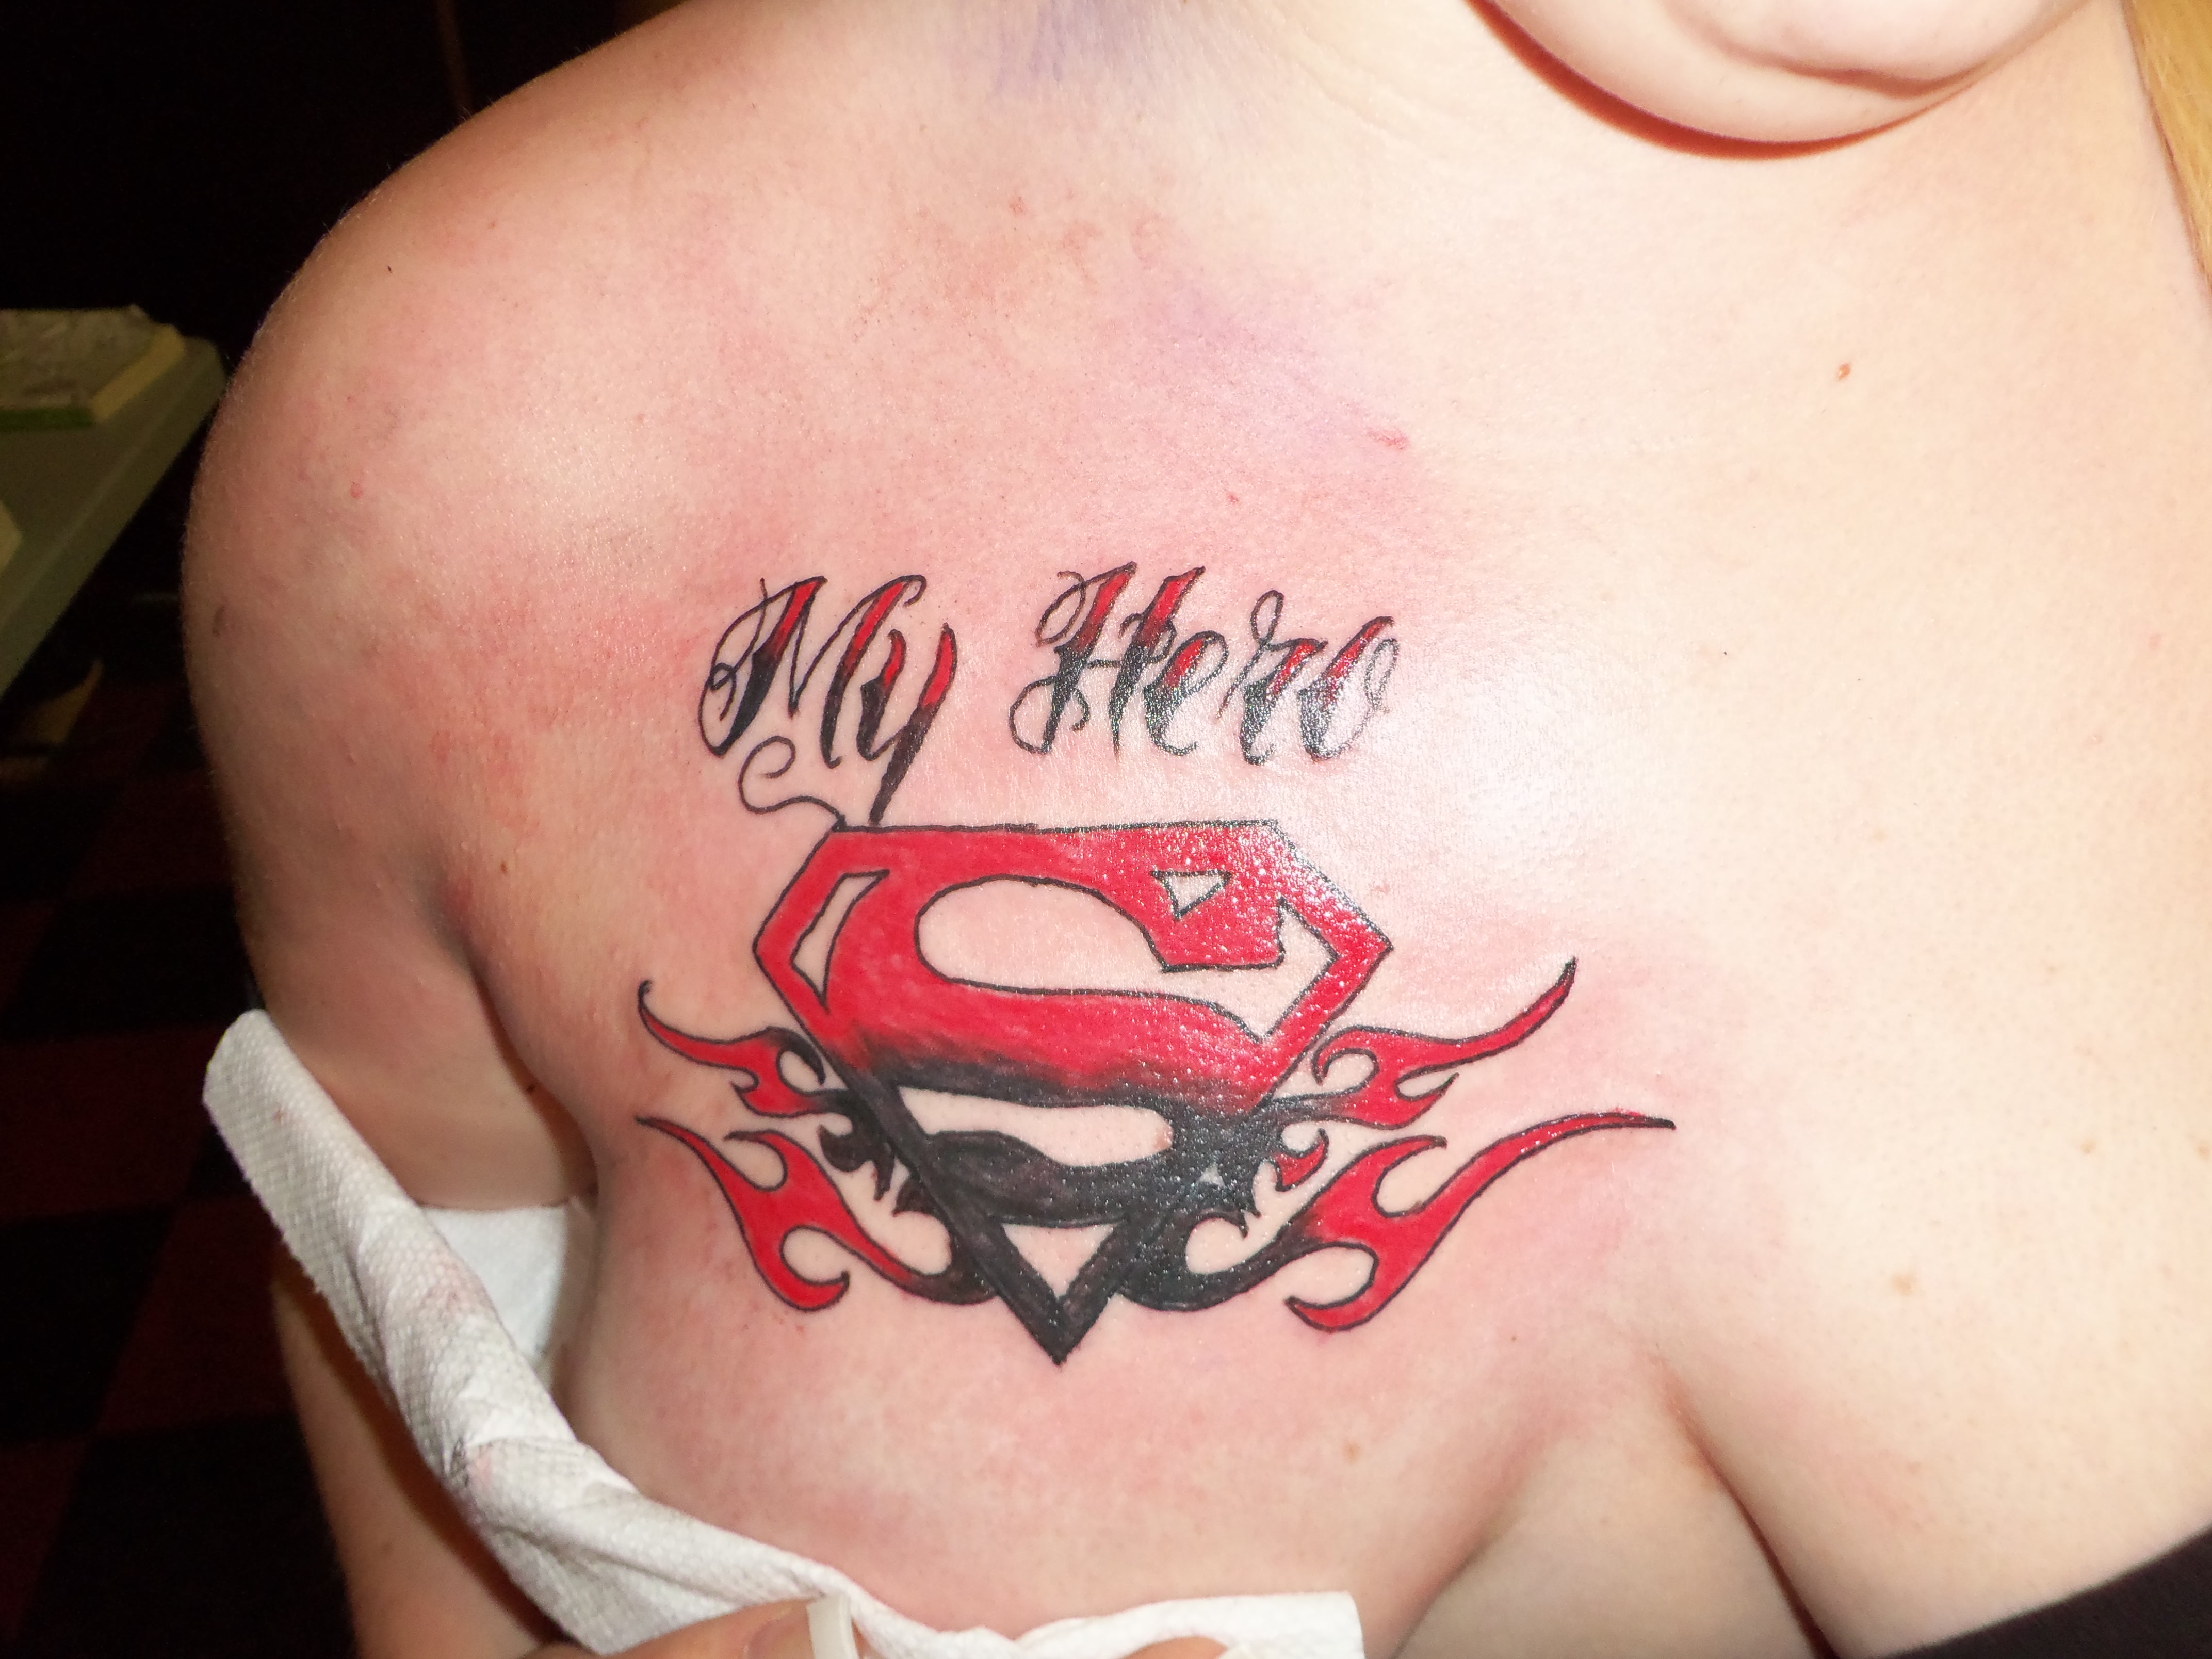 How To Make Tattoo Superman On Hand With Pen - YouTube